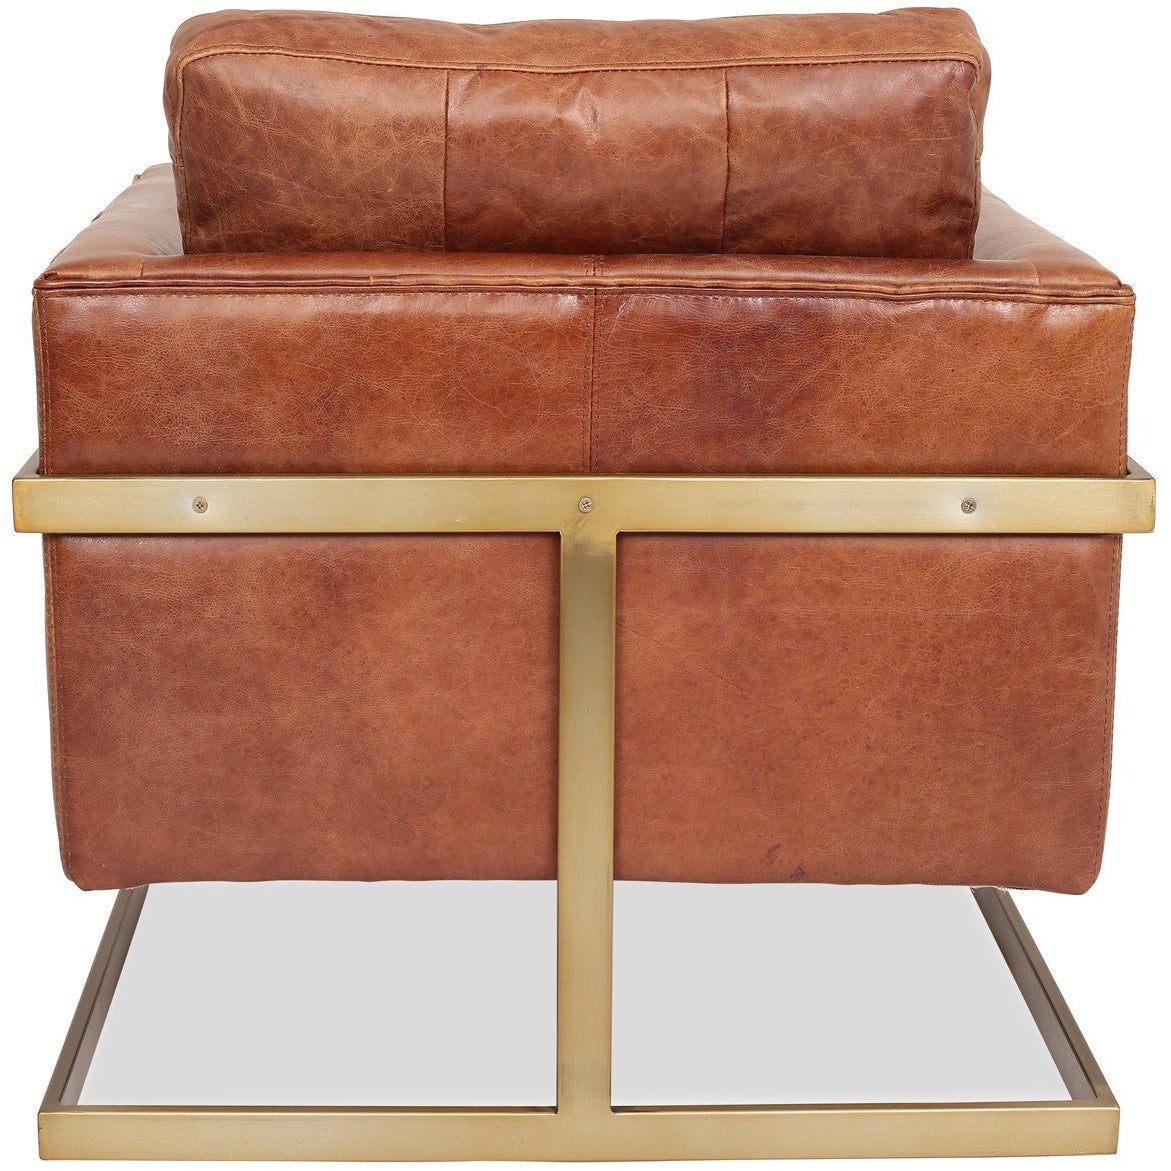 Edloe Finch London Leather Accent Chair